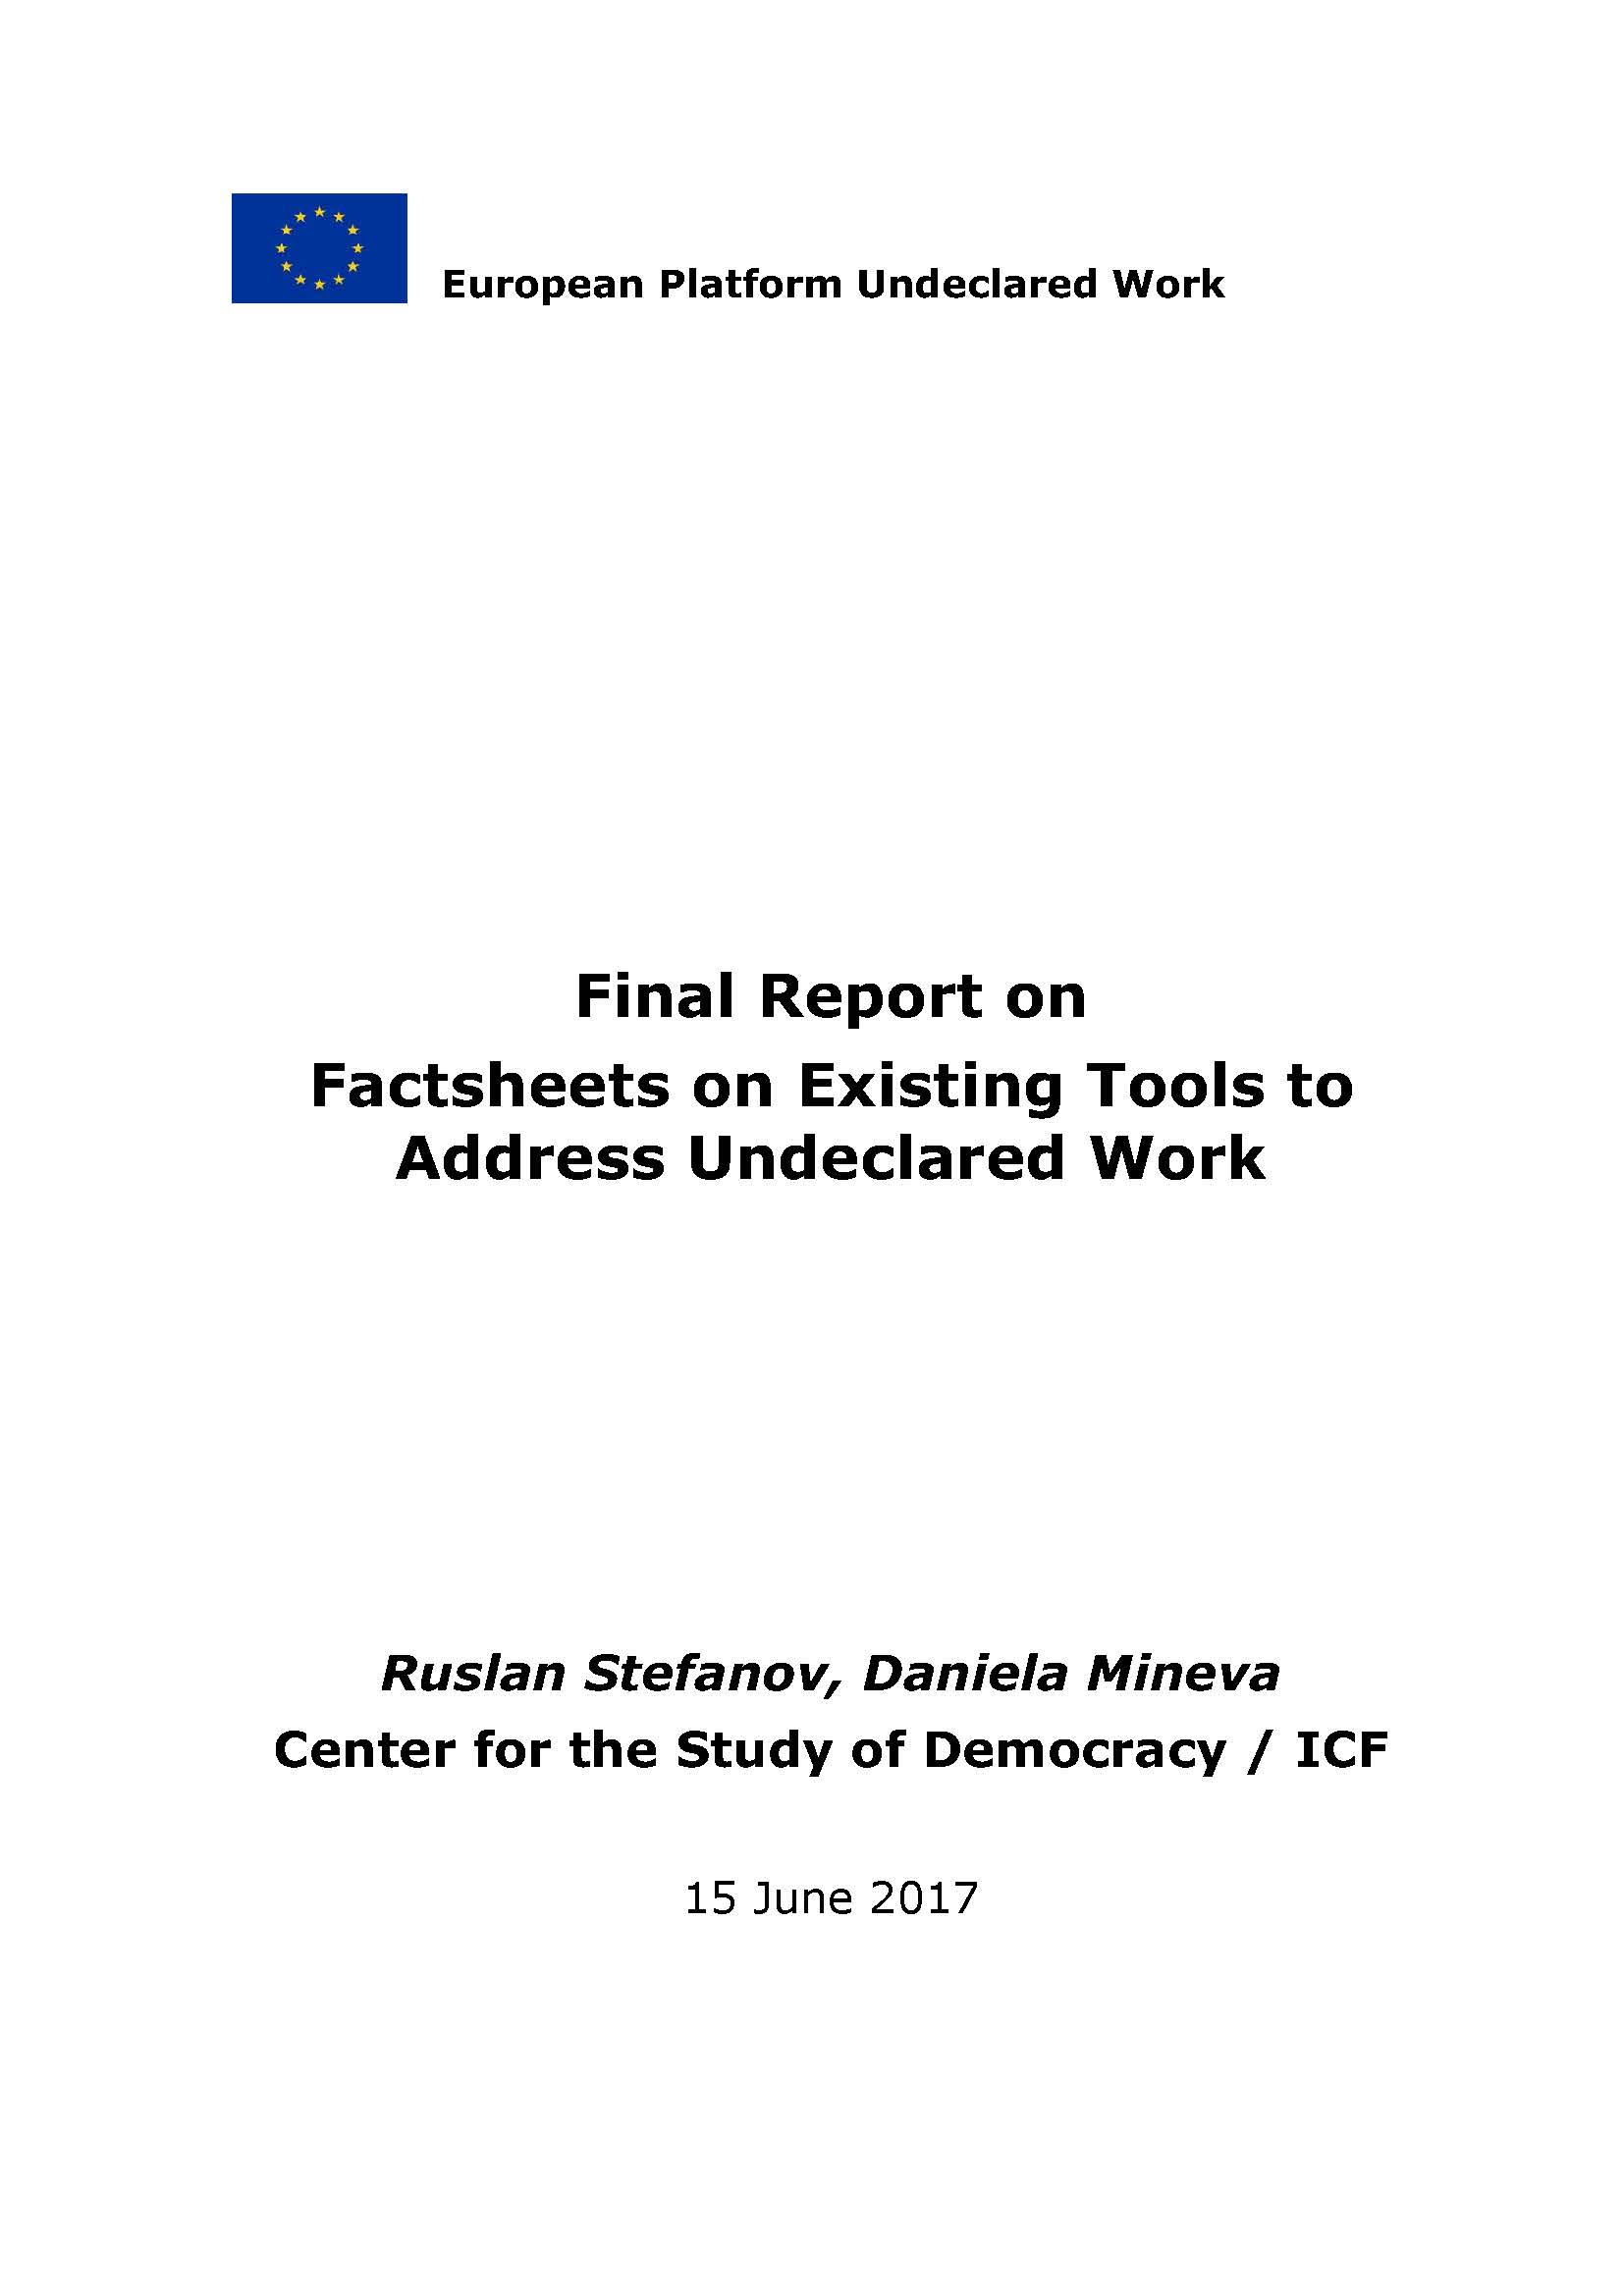 Final Report on Factsheets on Existing Tools to Address Undeclared Work Cover Image